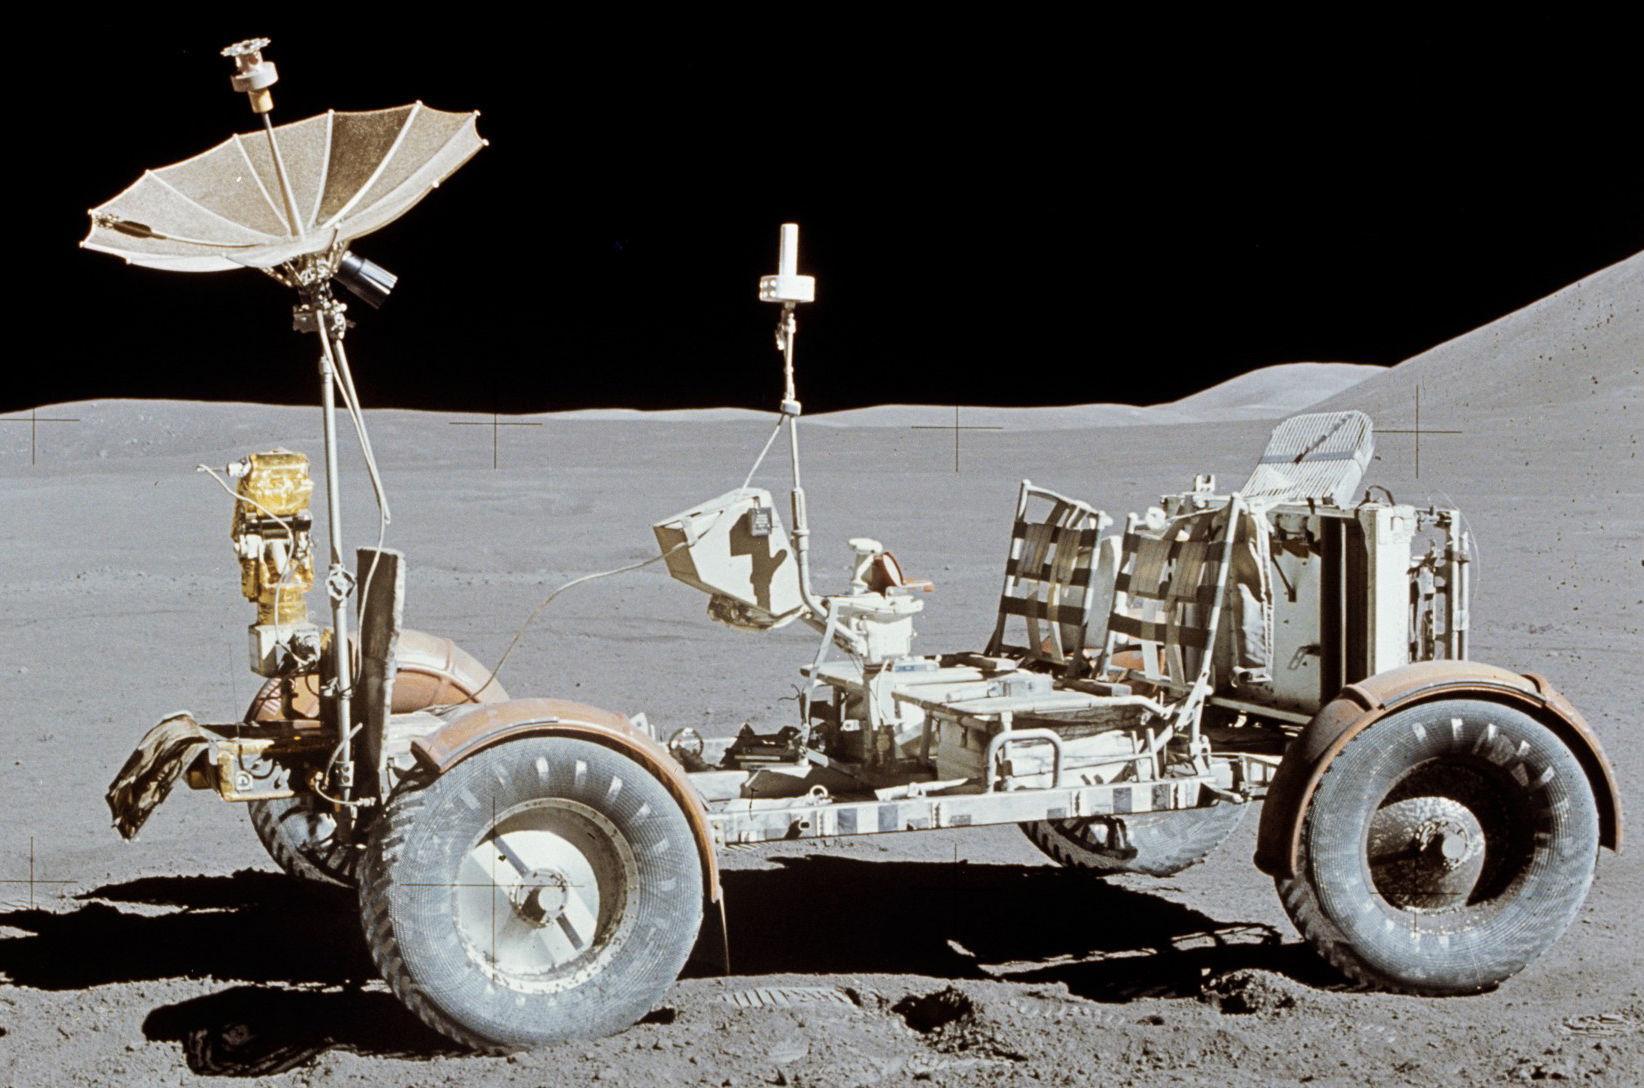 Image - First hydrogen fuel cell vehicle c. 1971.  The keys are still in it, let's go for a ride on the moon. - Post 341